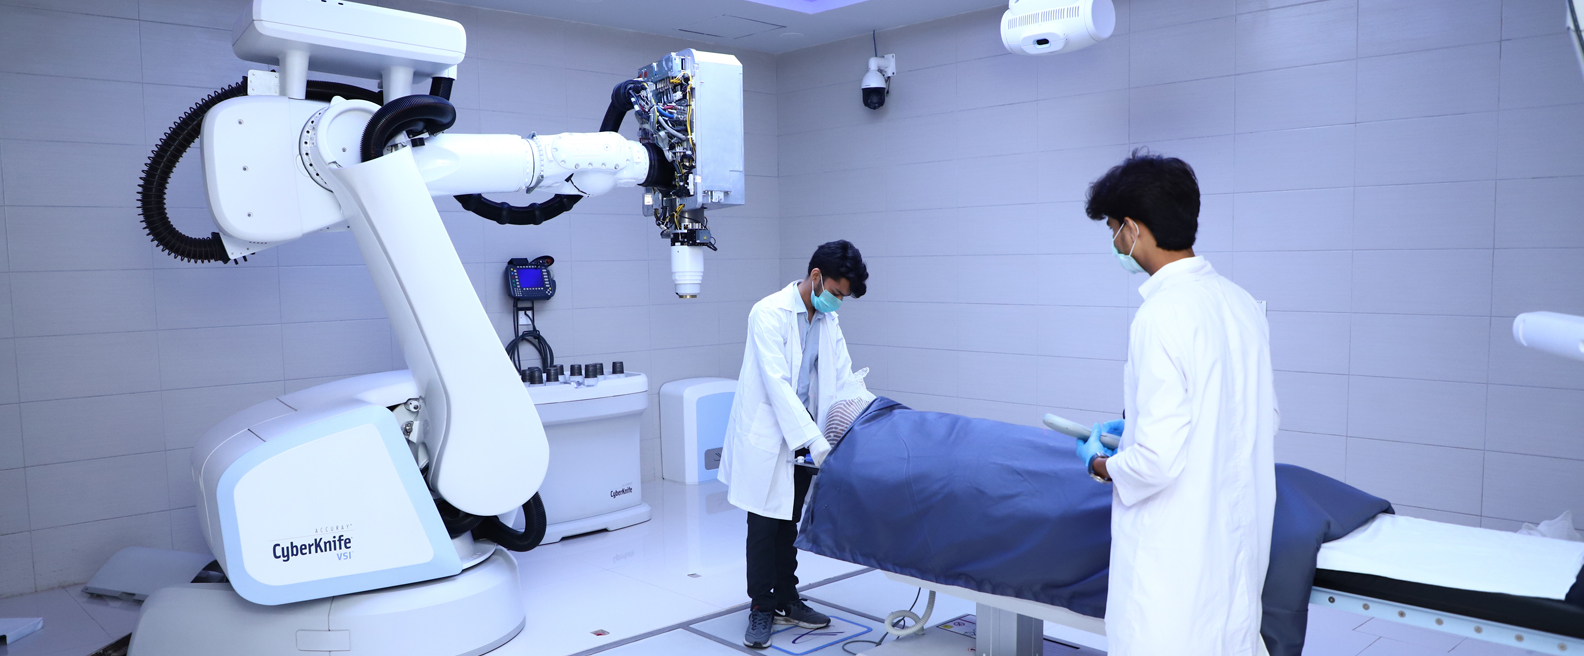 A patient being helped on CyberKnife technology equipment donated by PPL to Patients Aid Foundation for treatment of cancer patients at Jinnah Postgraduate Medical Center